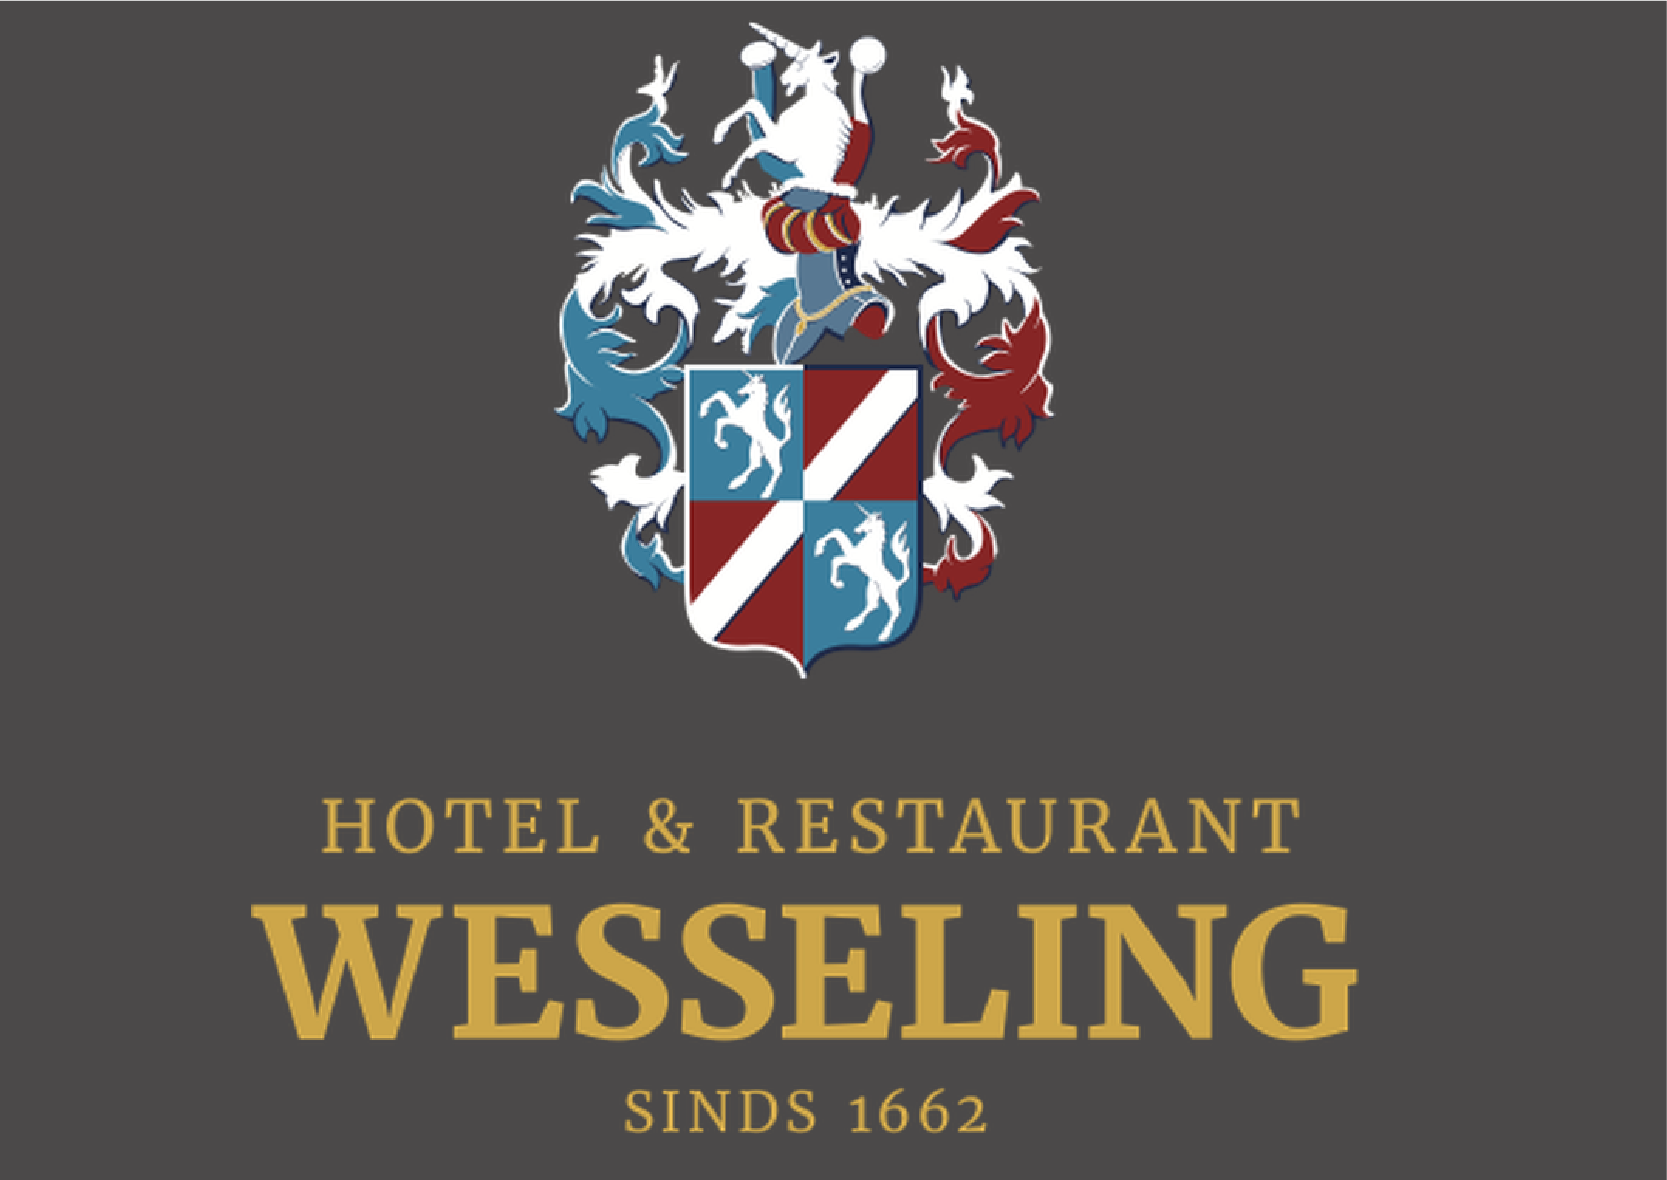 Hotel Wesseling 